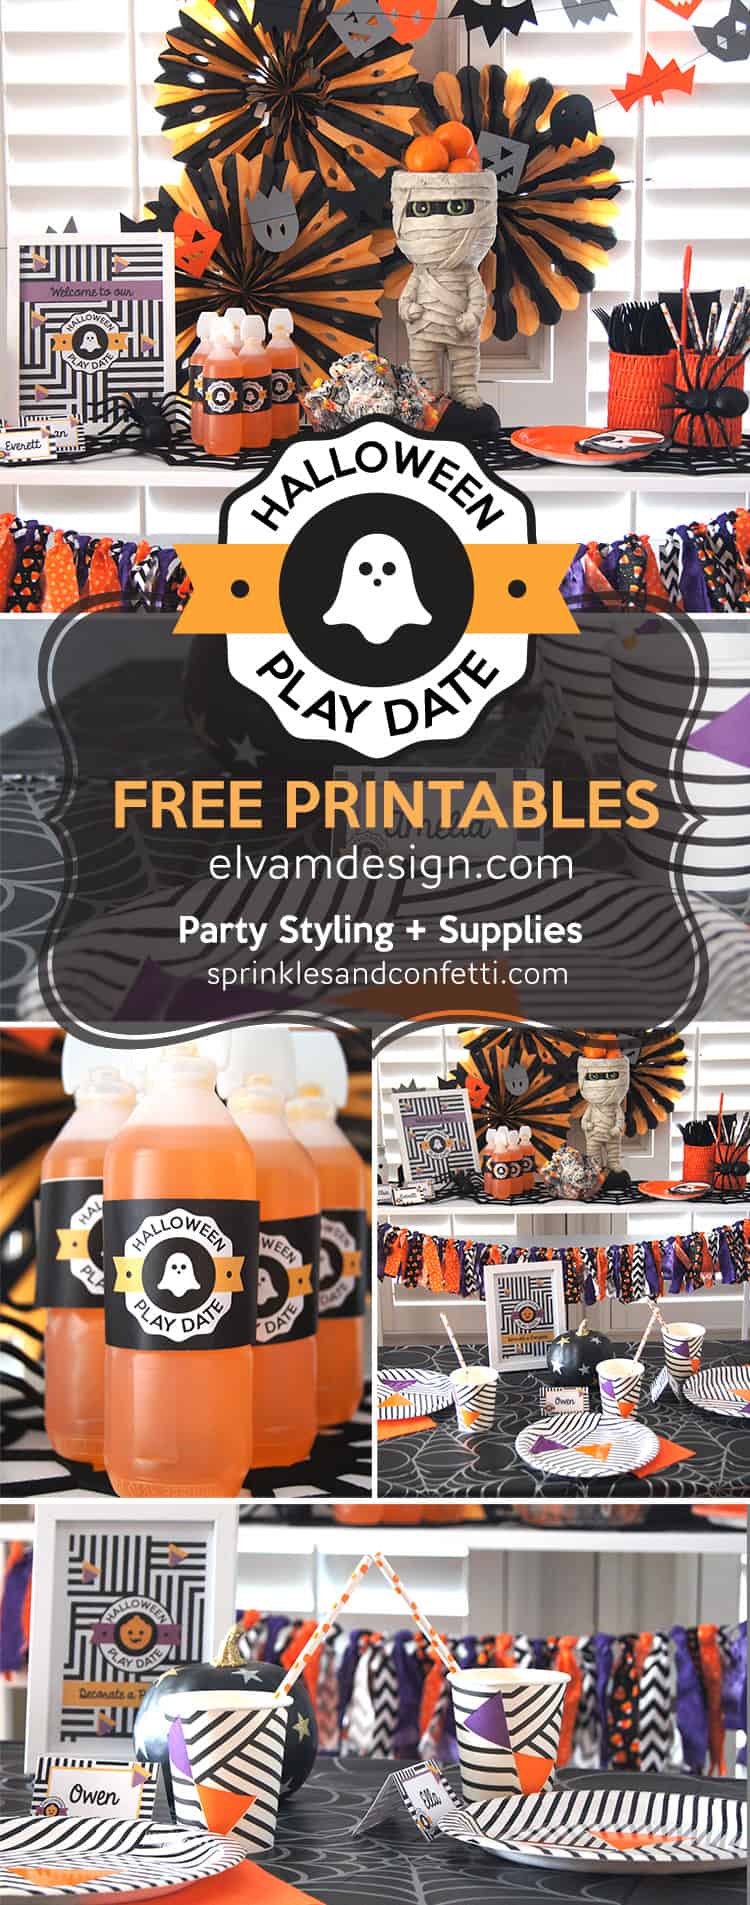 Kids Halloween Play Date with free printables